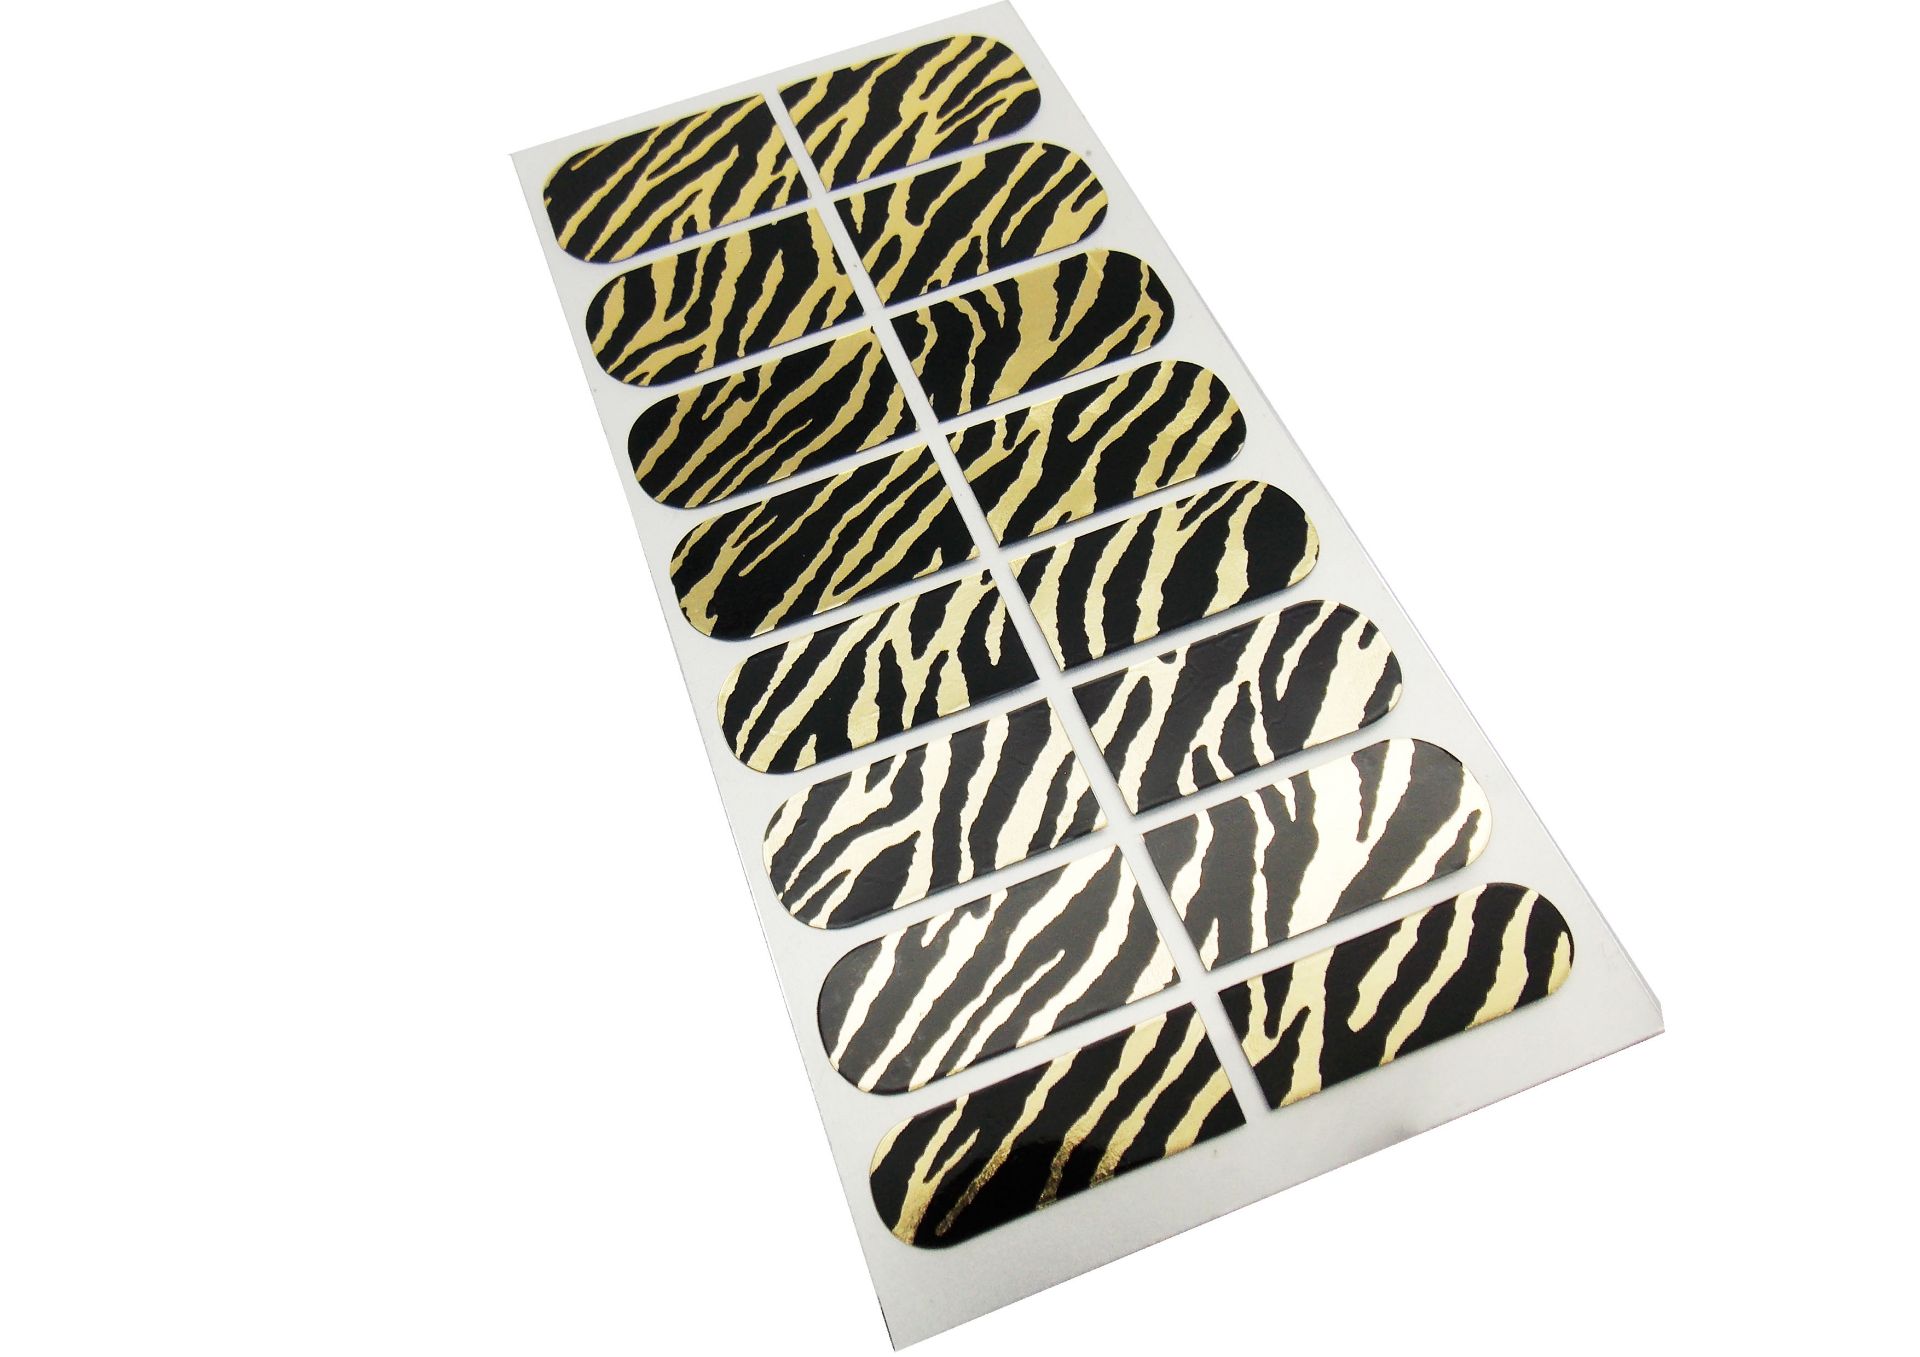 144 Packs Of Professional Nail Art Wrap Transfers - 3 Different Animal Print Styles - Image 3 of 9